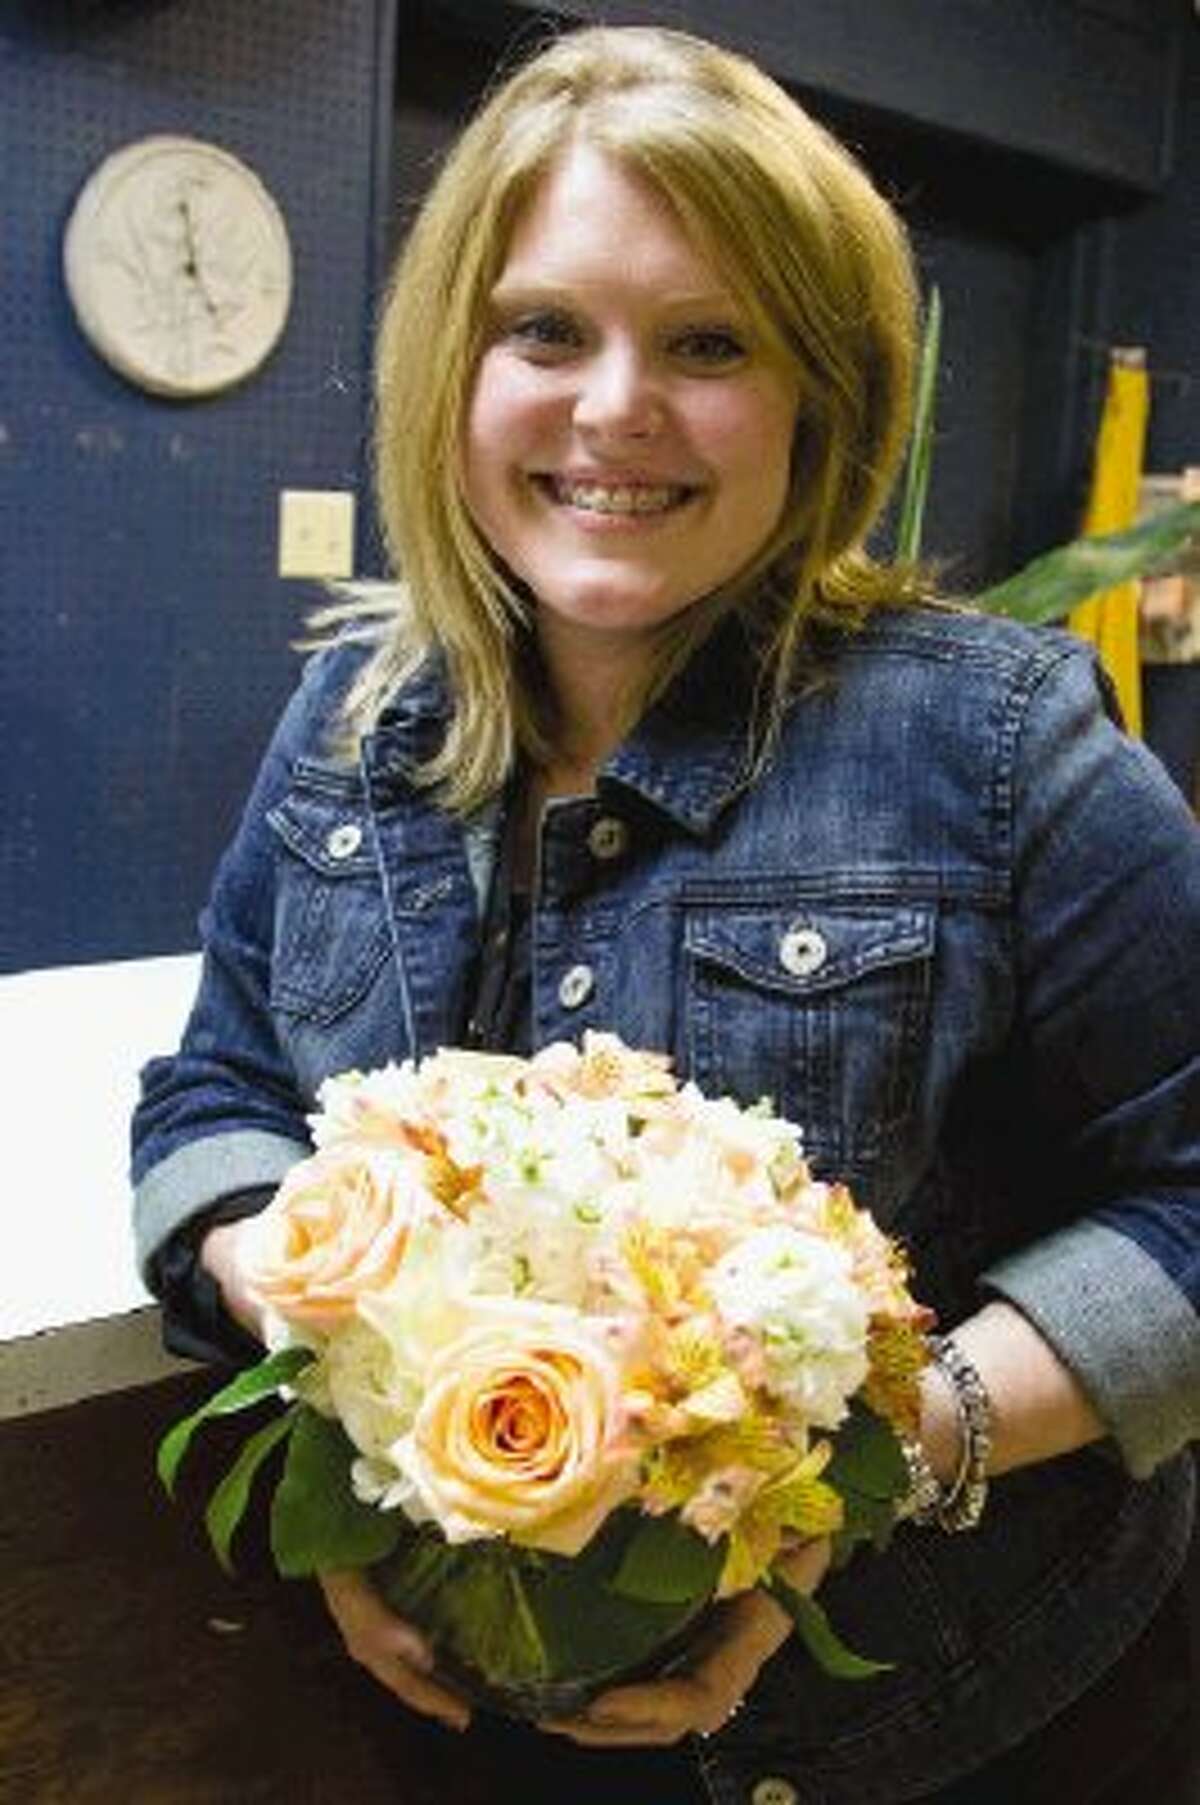 Jessica Carter helps out with her family business, Carterâ€™s Florist, on Tuesday afternoon in Conroe. The business has been family owned and operated for more than 40 years.